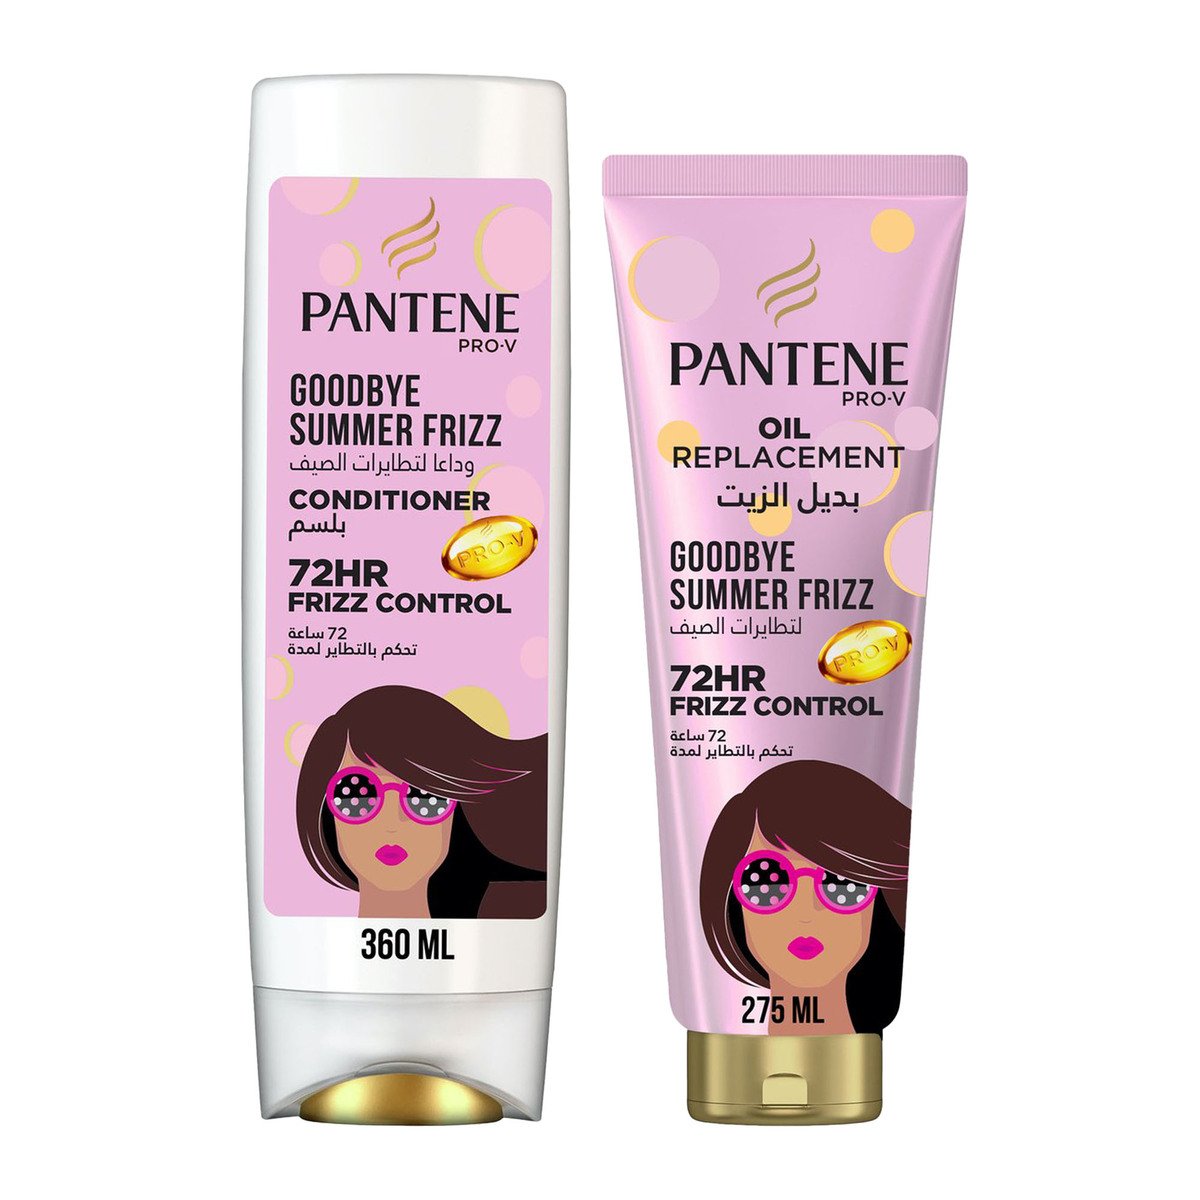 Pantene Pro-V Goodbye Summer Frizz Conditioner 360 ml + Oil Replacement 275 ml